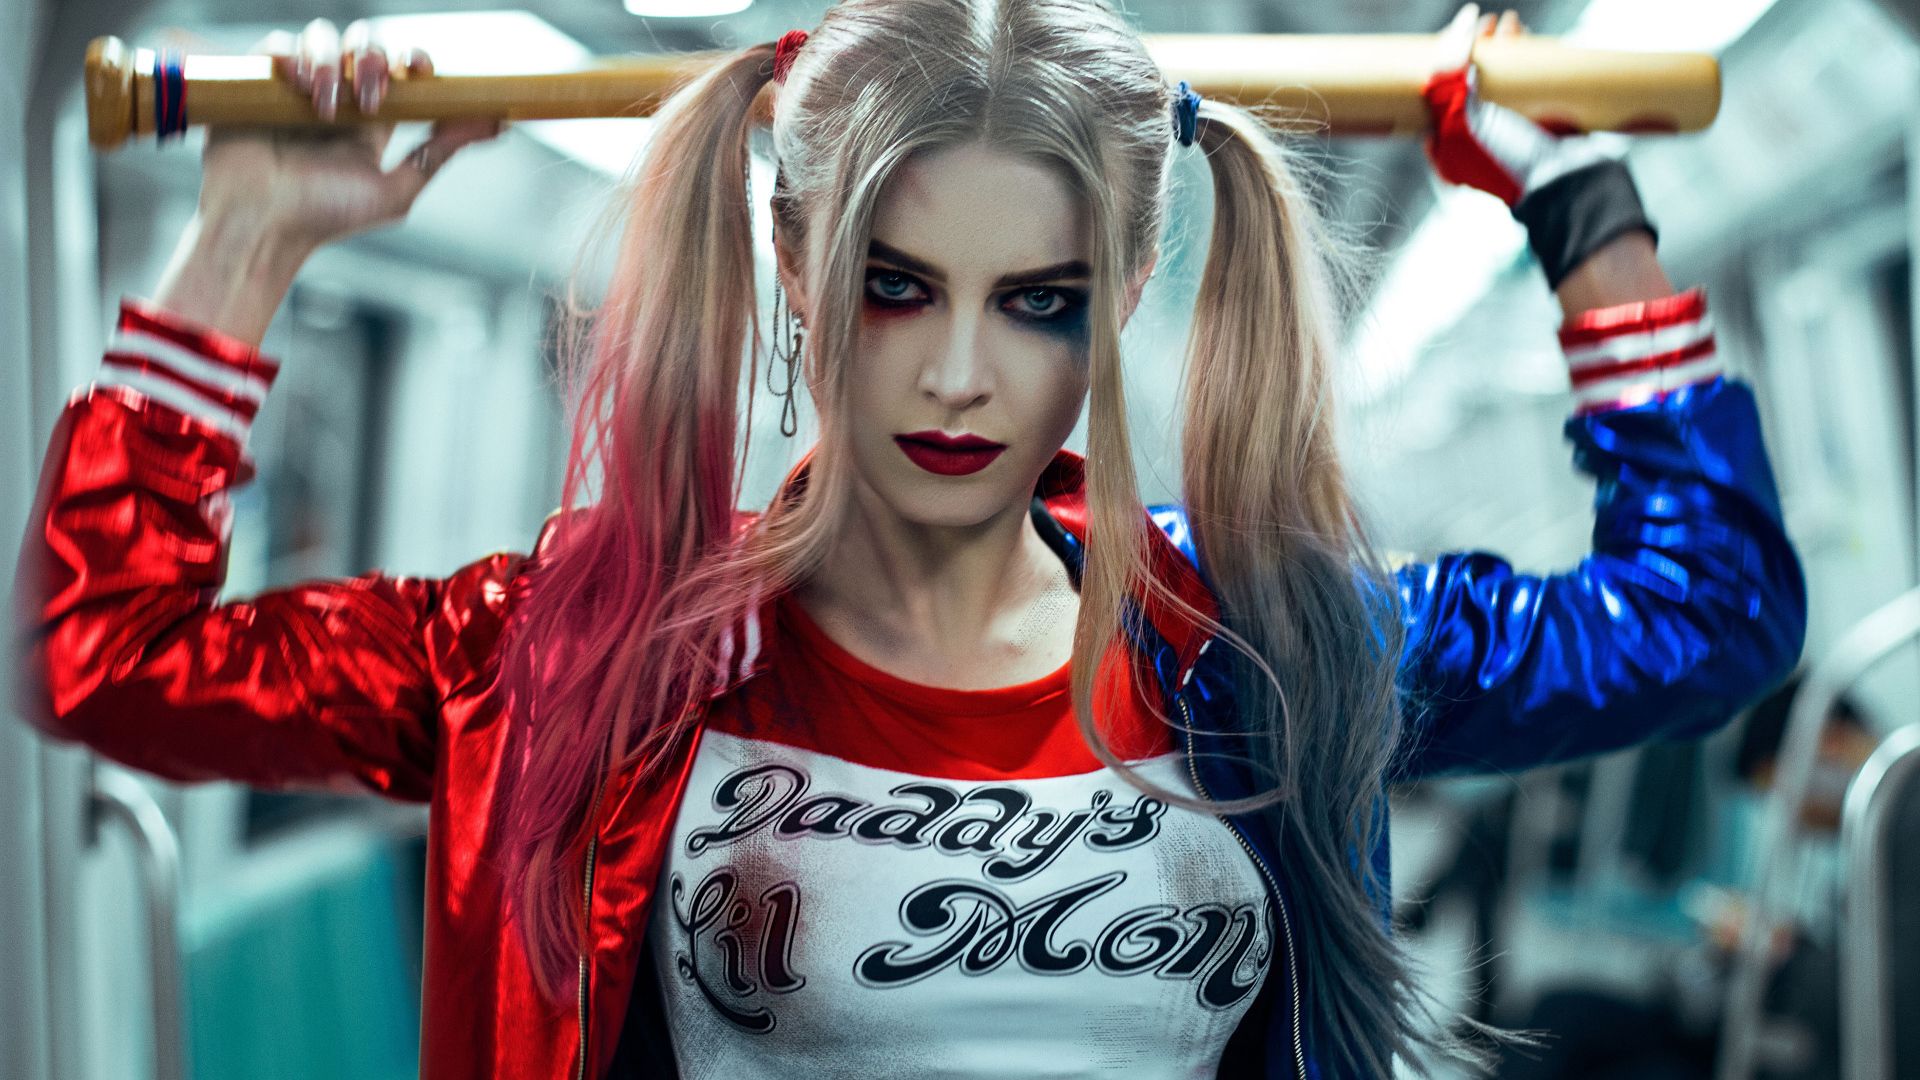 The character of the film Suicide Squad Harley Quinn with a